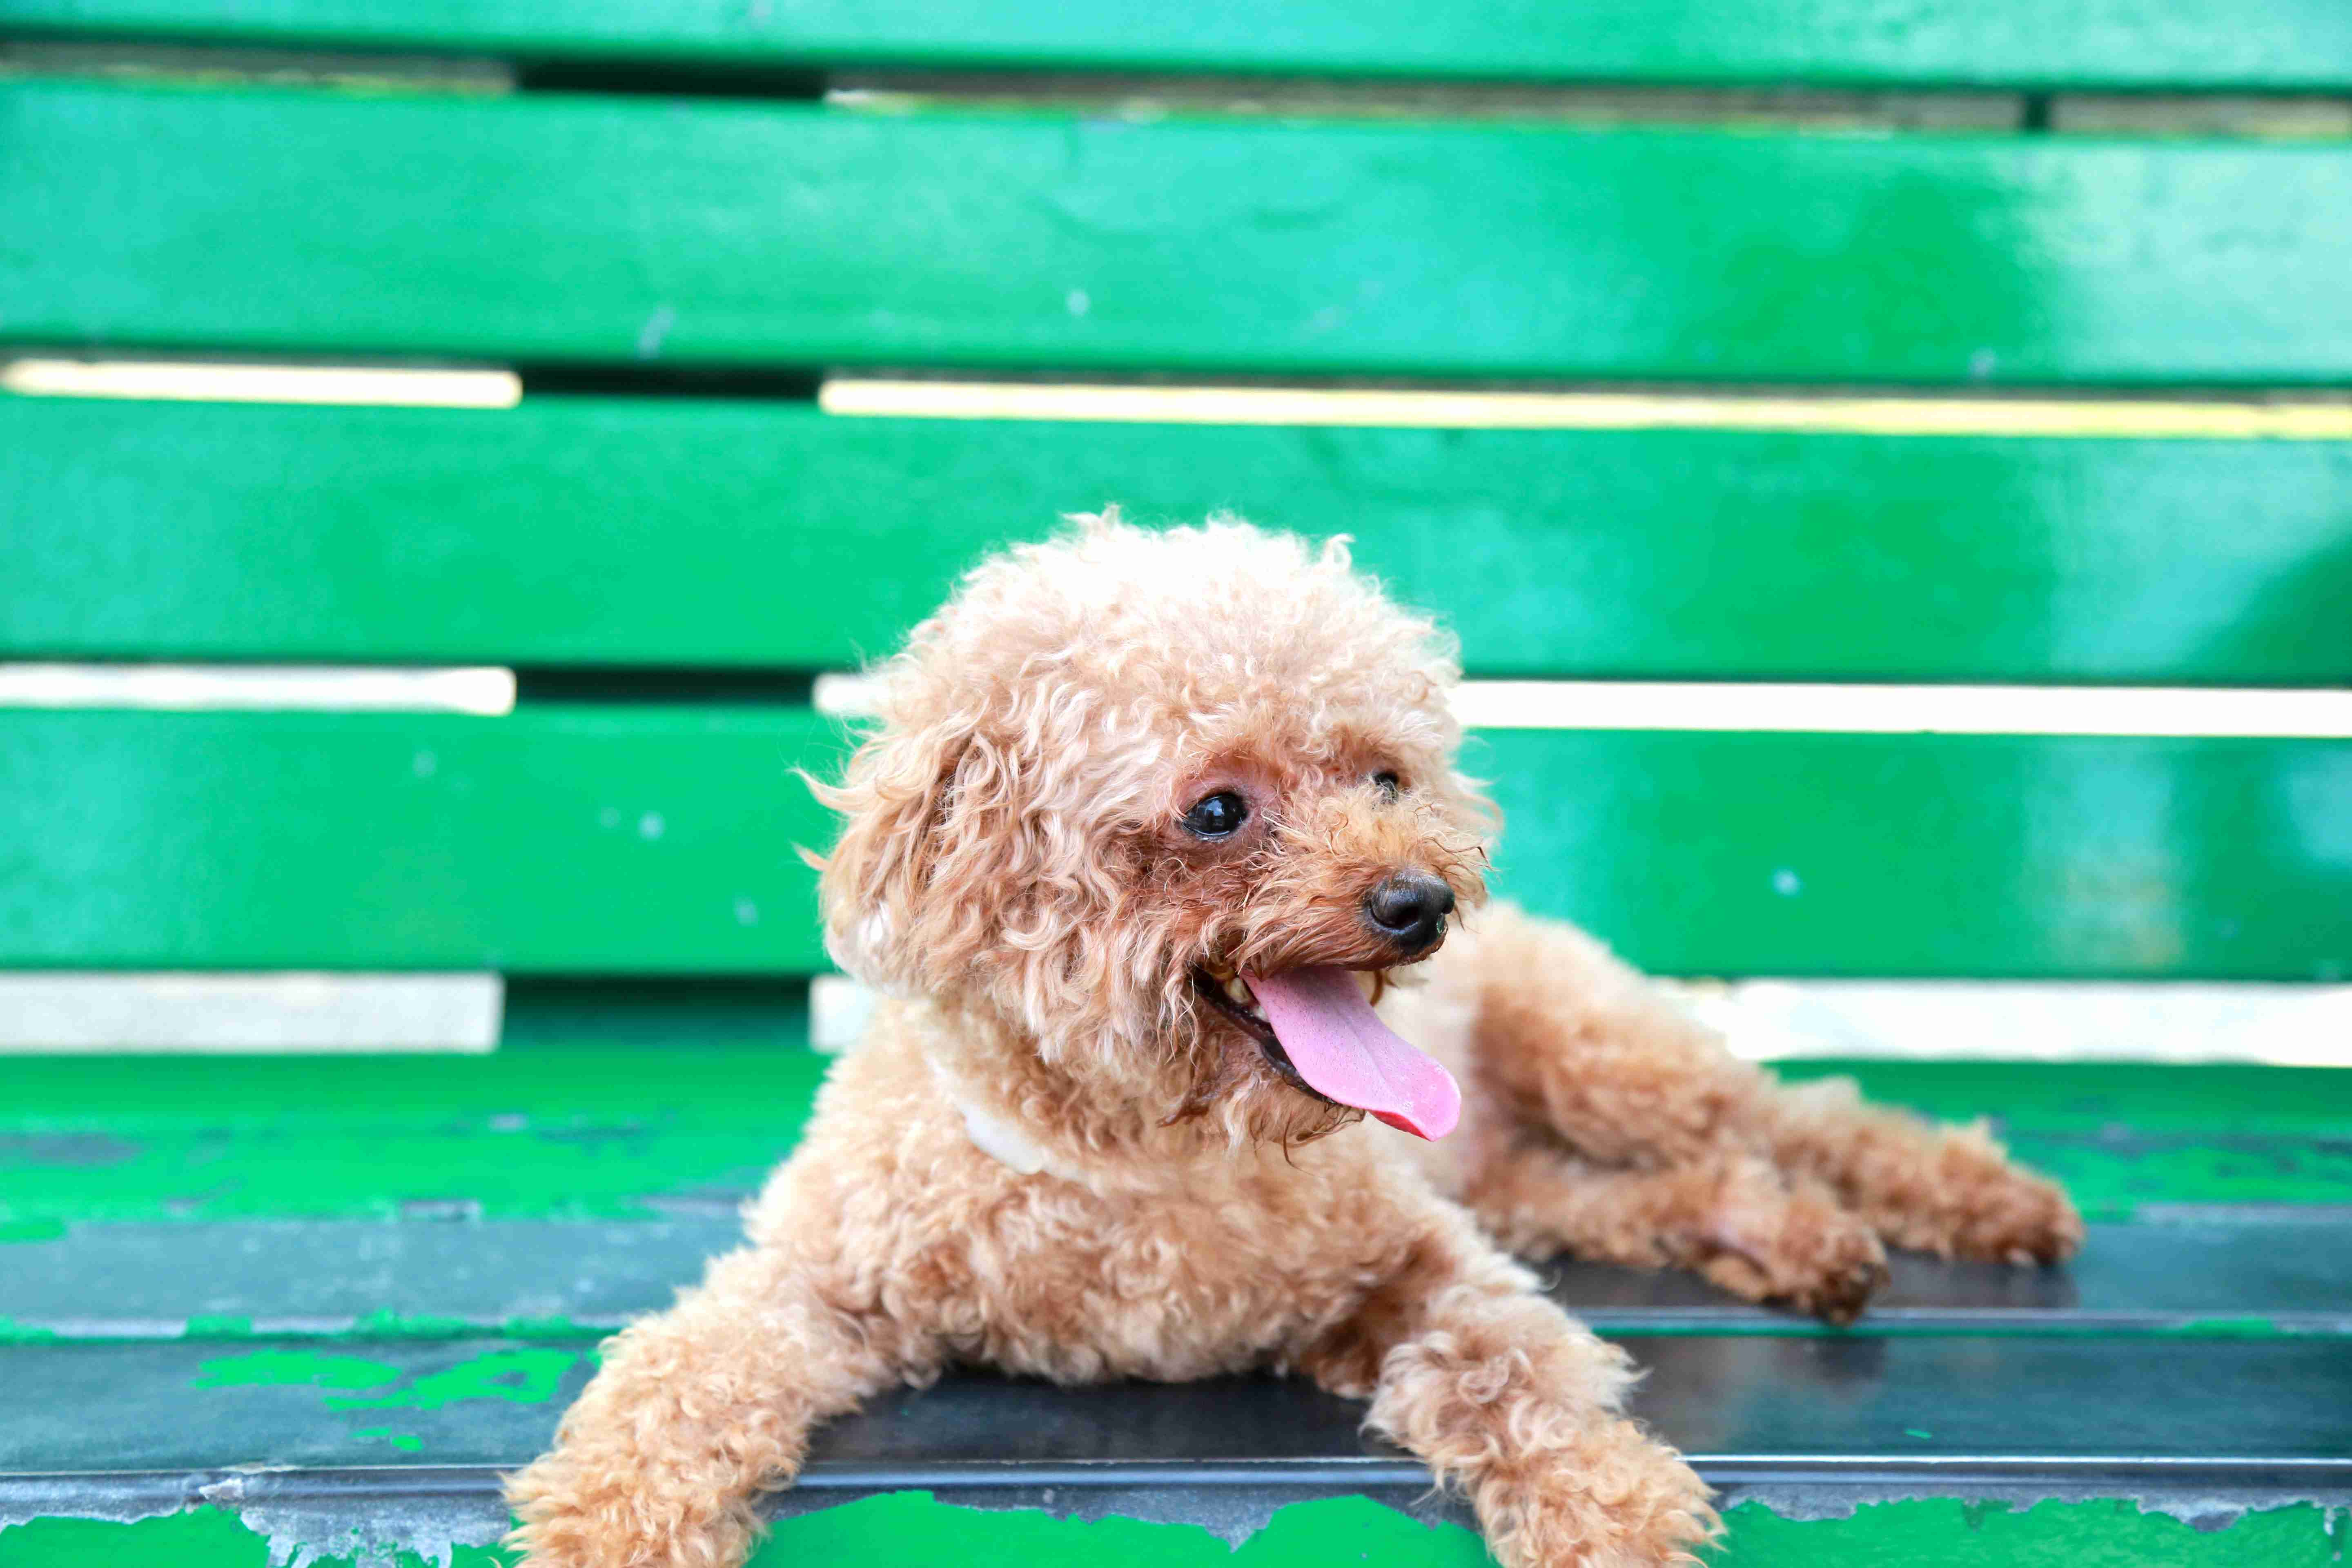 Can Poodles develop urinary tract infections, and how can they be treated?